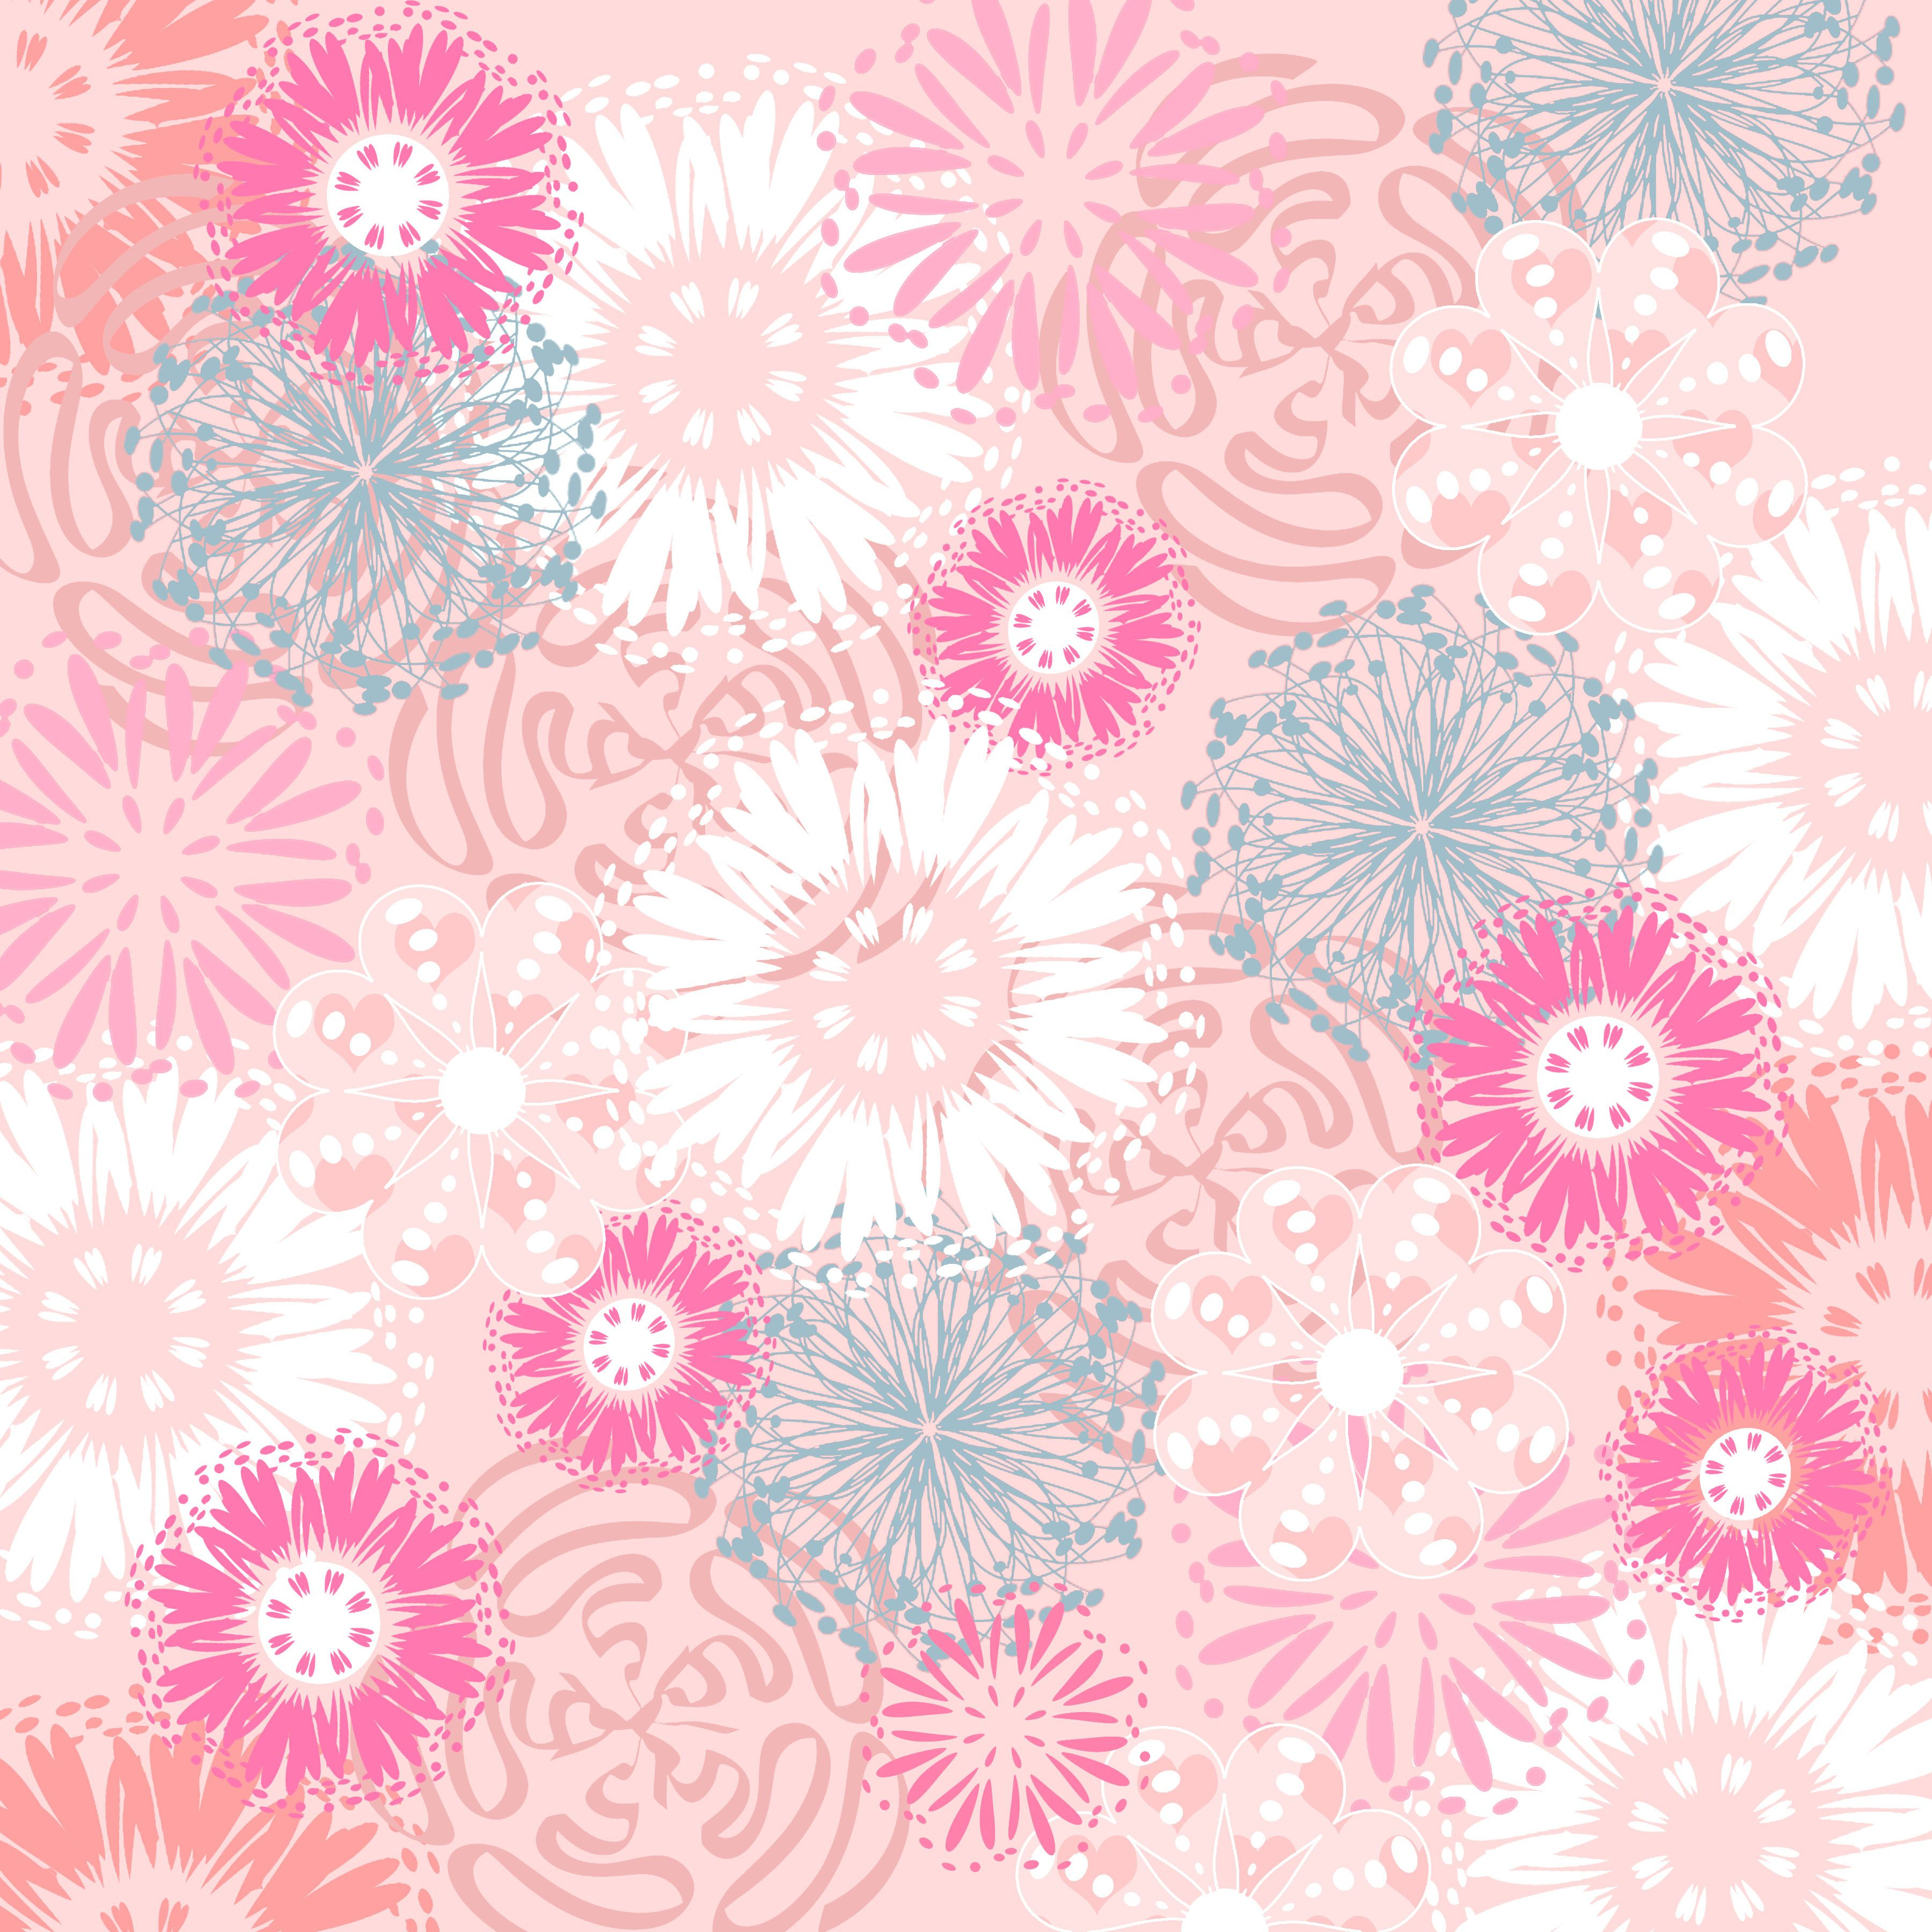 Free+Printable+Scrapbook+Paper | Scrapbook Paper | Pinterest - Free Printable Background Pages